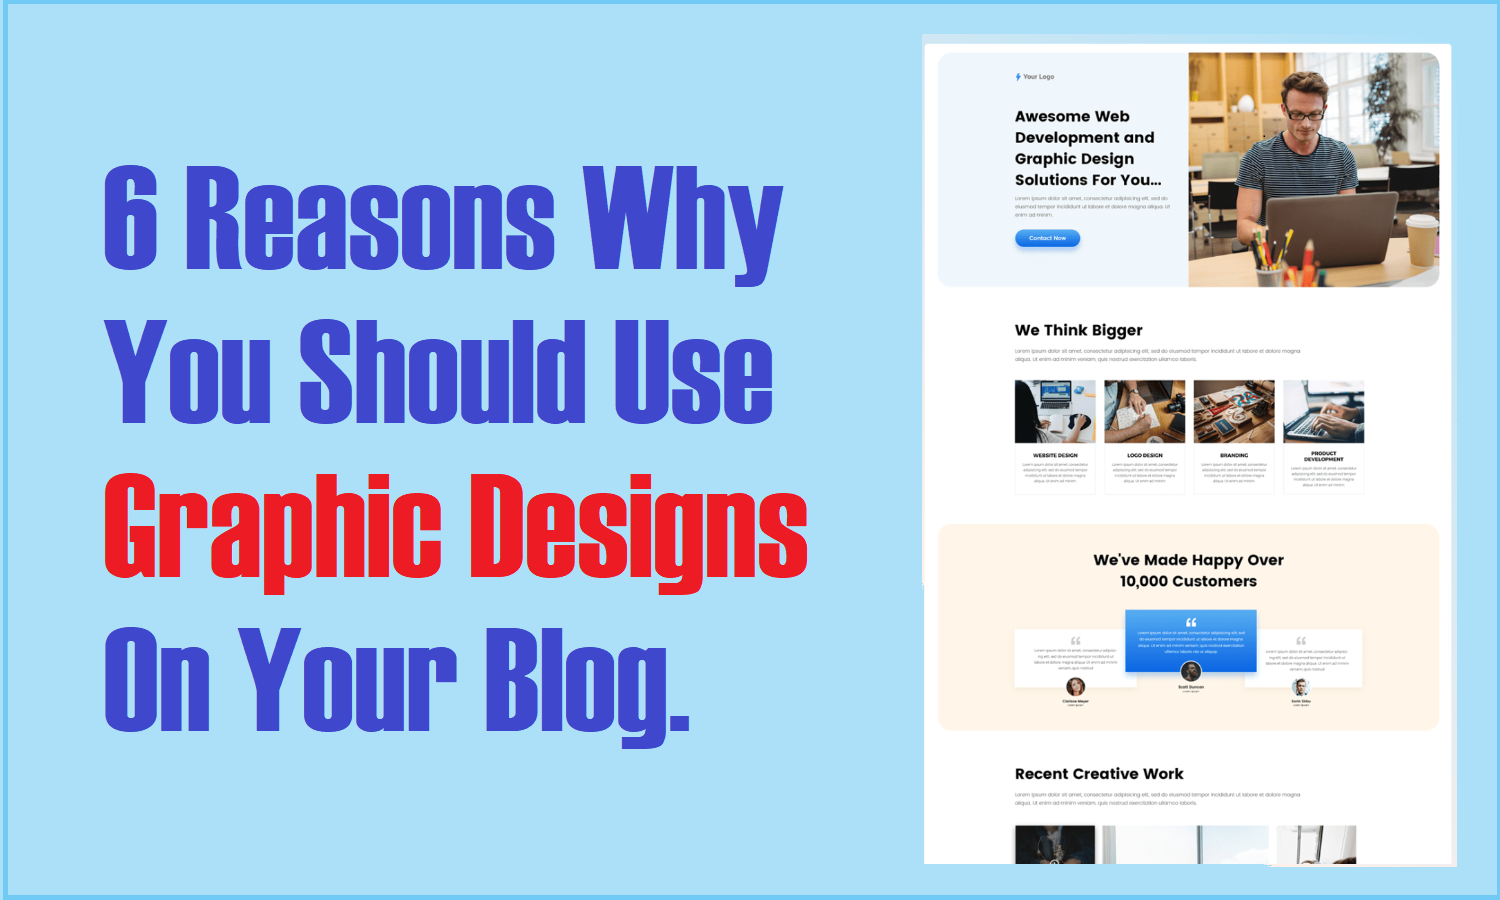 6 Reasons Why You Should Use Graphic Designs On Your Blog.